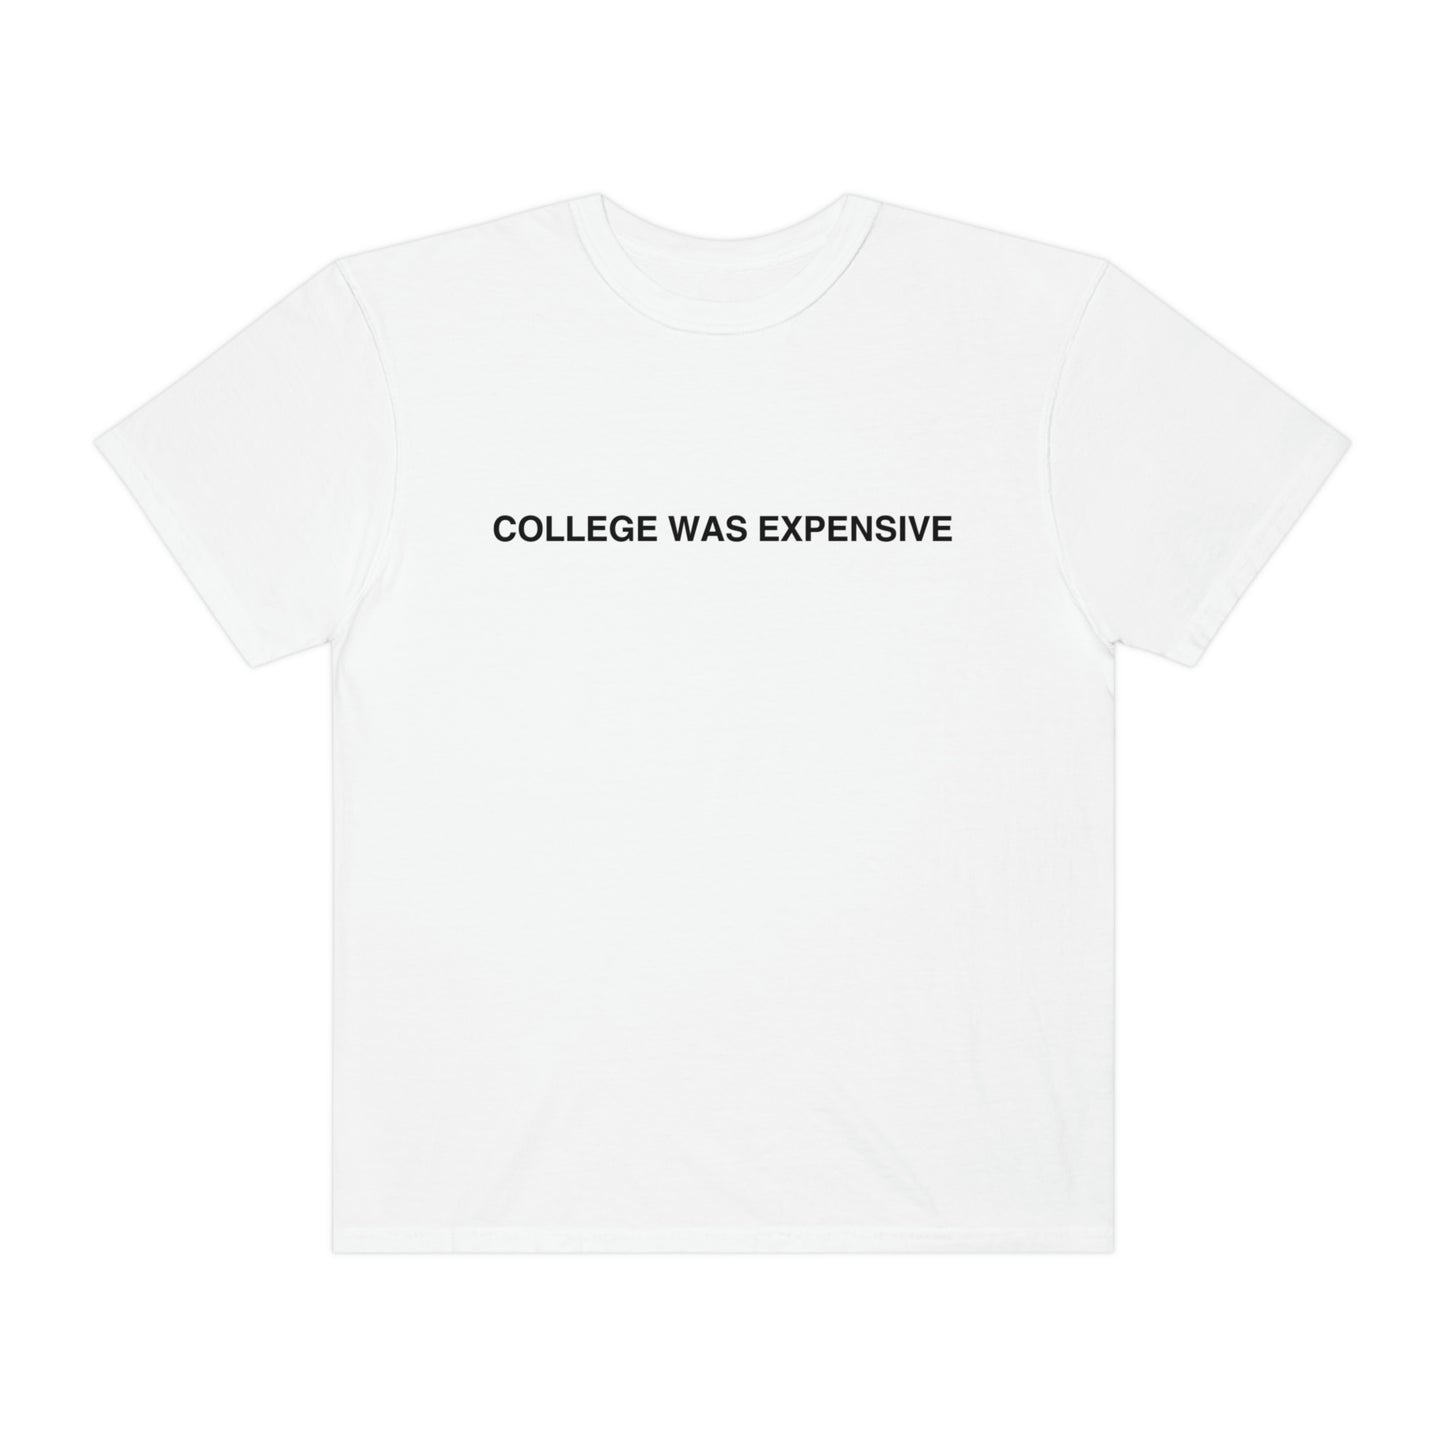 COLLEGE WAS EXPENSIVE t-shirt